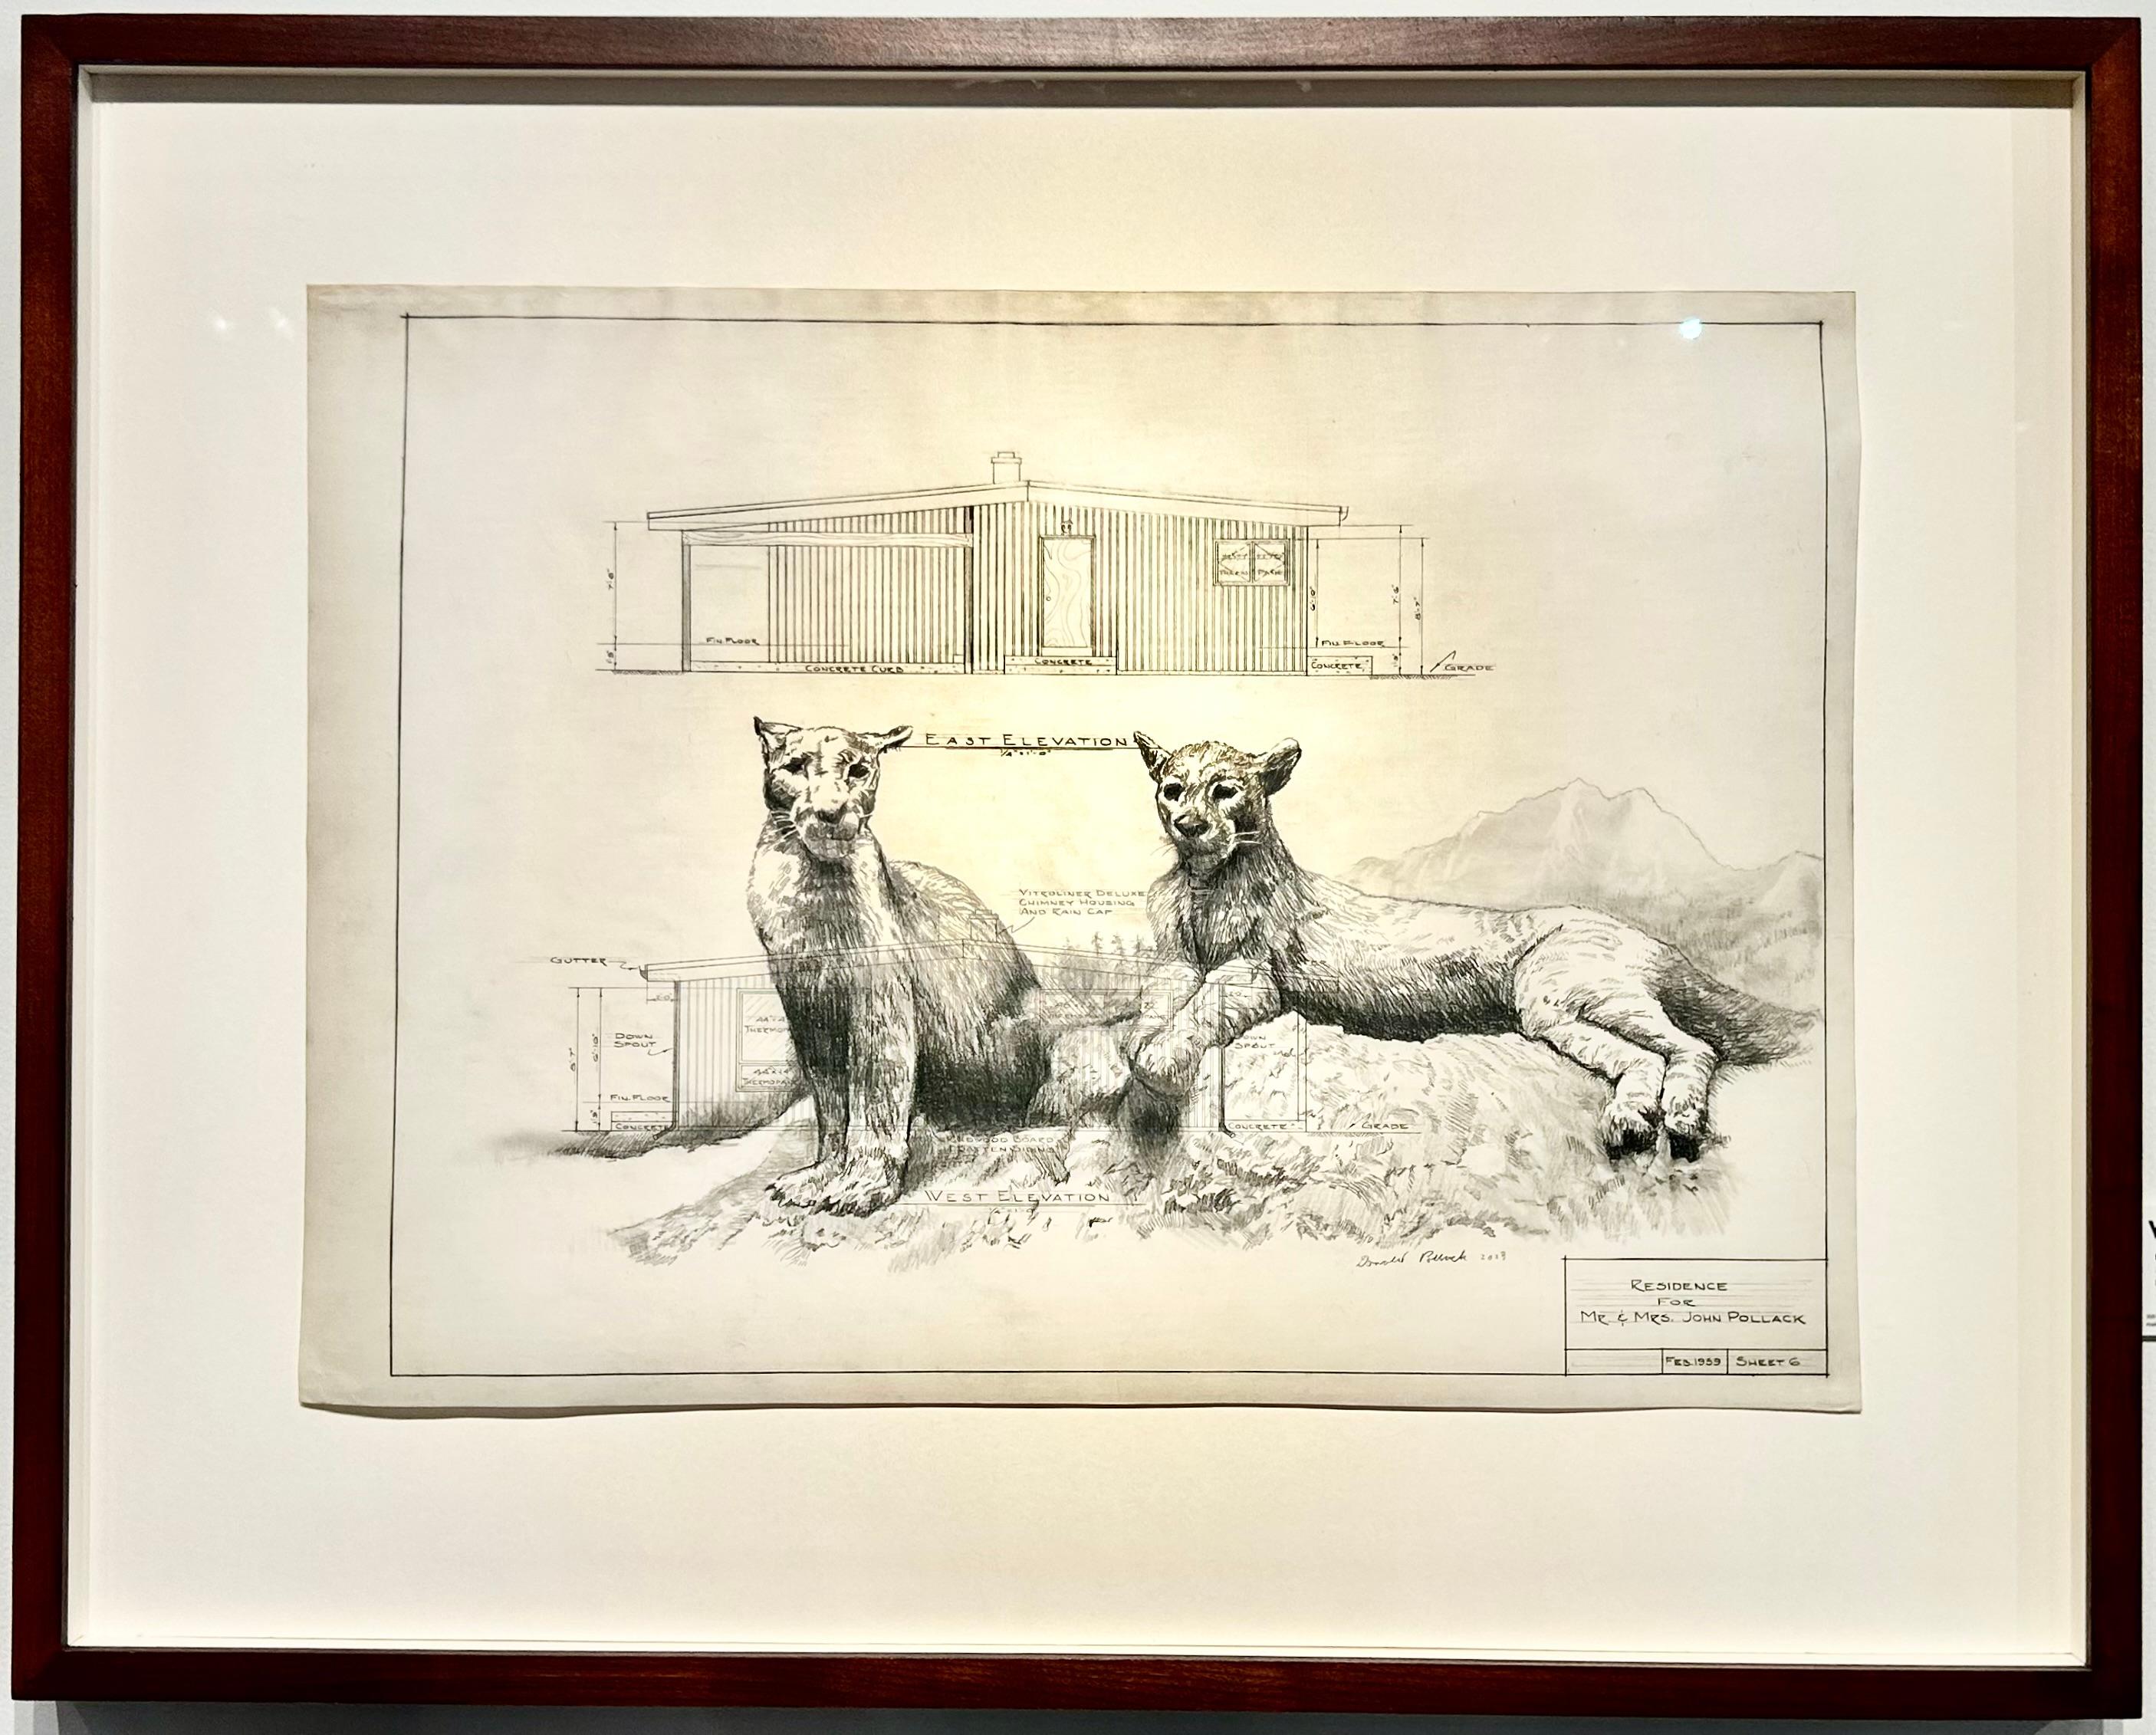 Sentinel - Mountain Lions in Graphite on Antique Architectural Drawings  - Art by Don Pollack